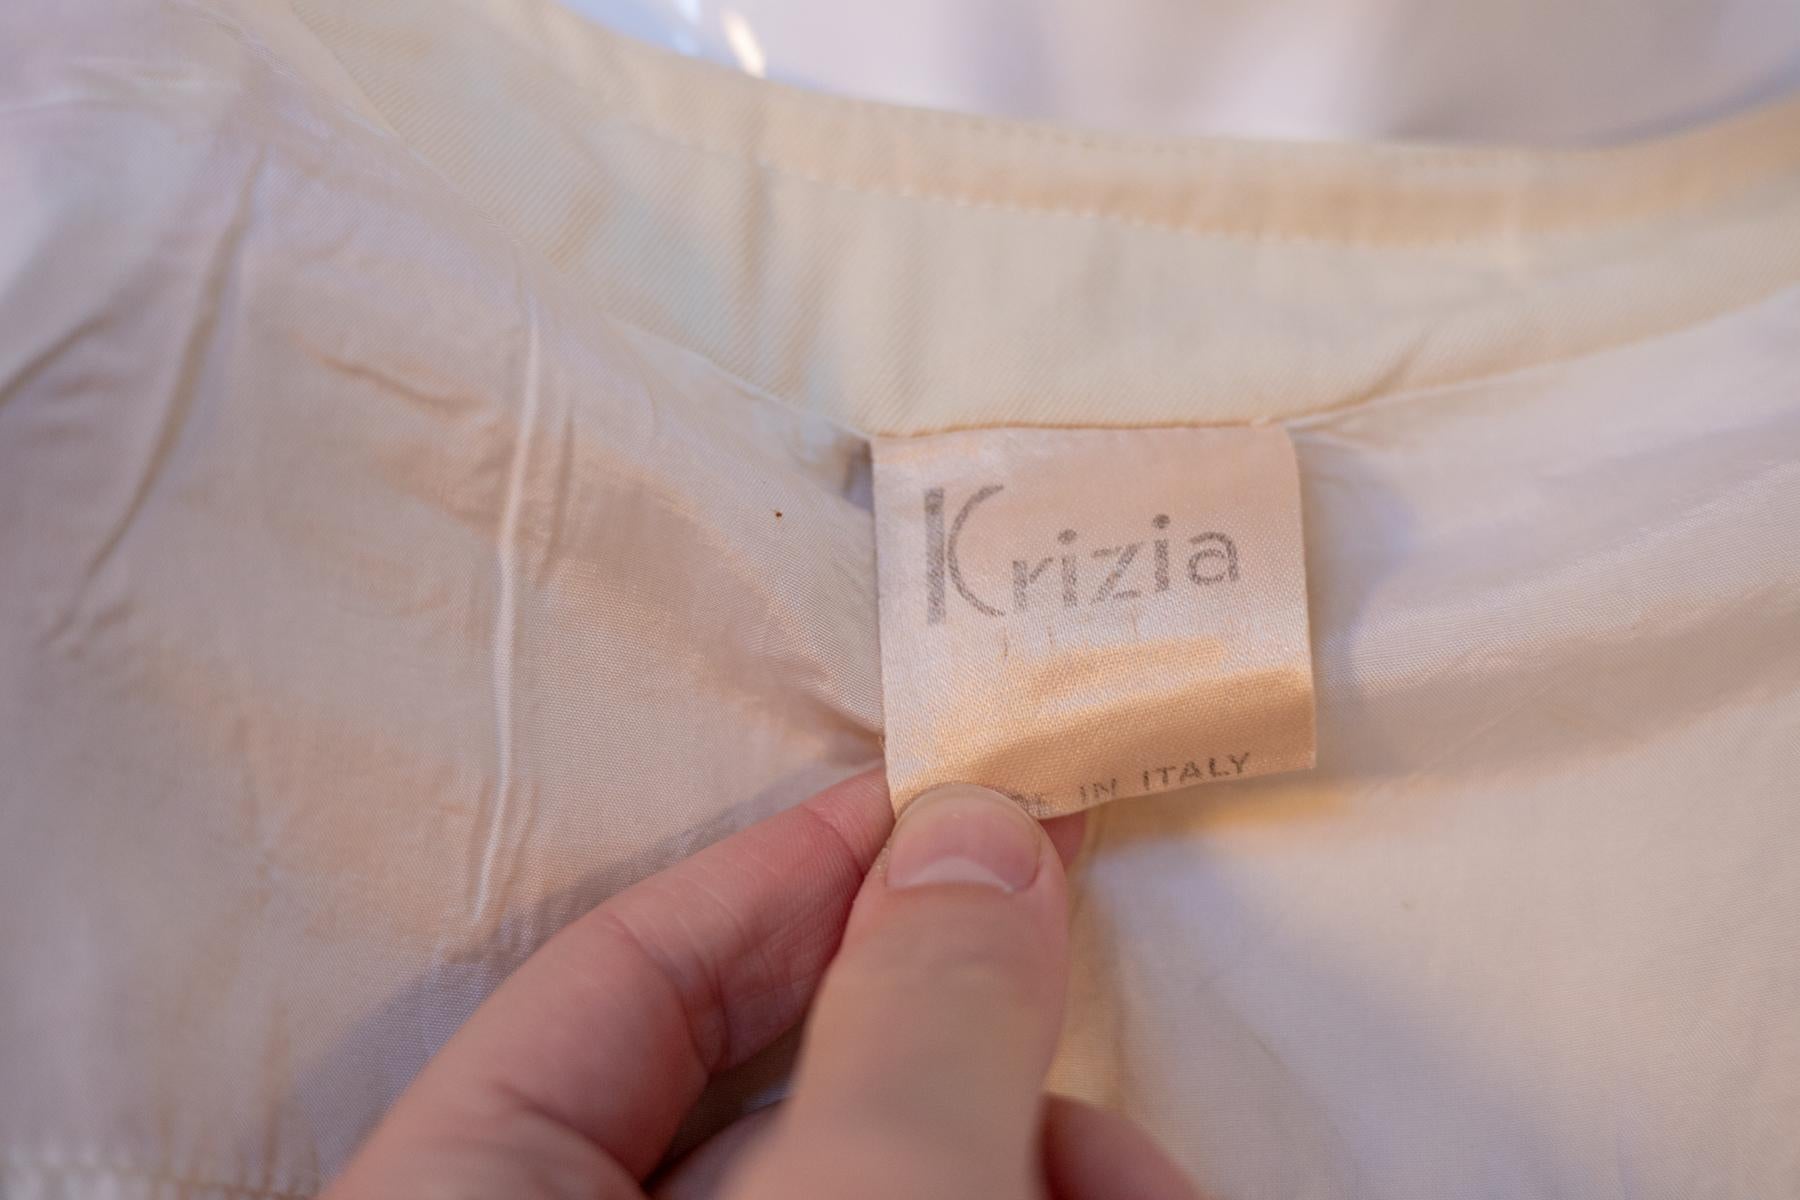 Chic ivory wool blouse by Krizia from the 2000s, made in Italy. ORIGINAL LABEL.
The blouse is totally made of ivory-colored wool, with a collared U-shaped collar. The cut is very straight and severe. The sleeves are long and very soft, adorned with